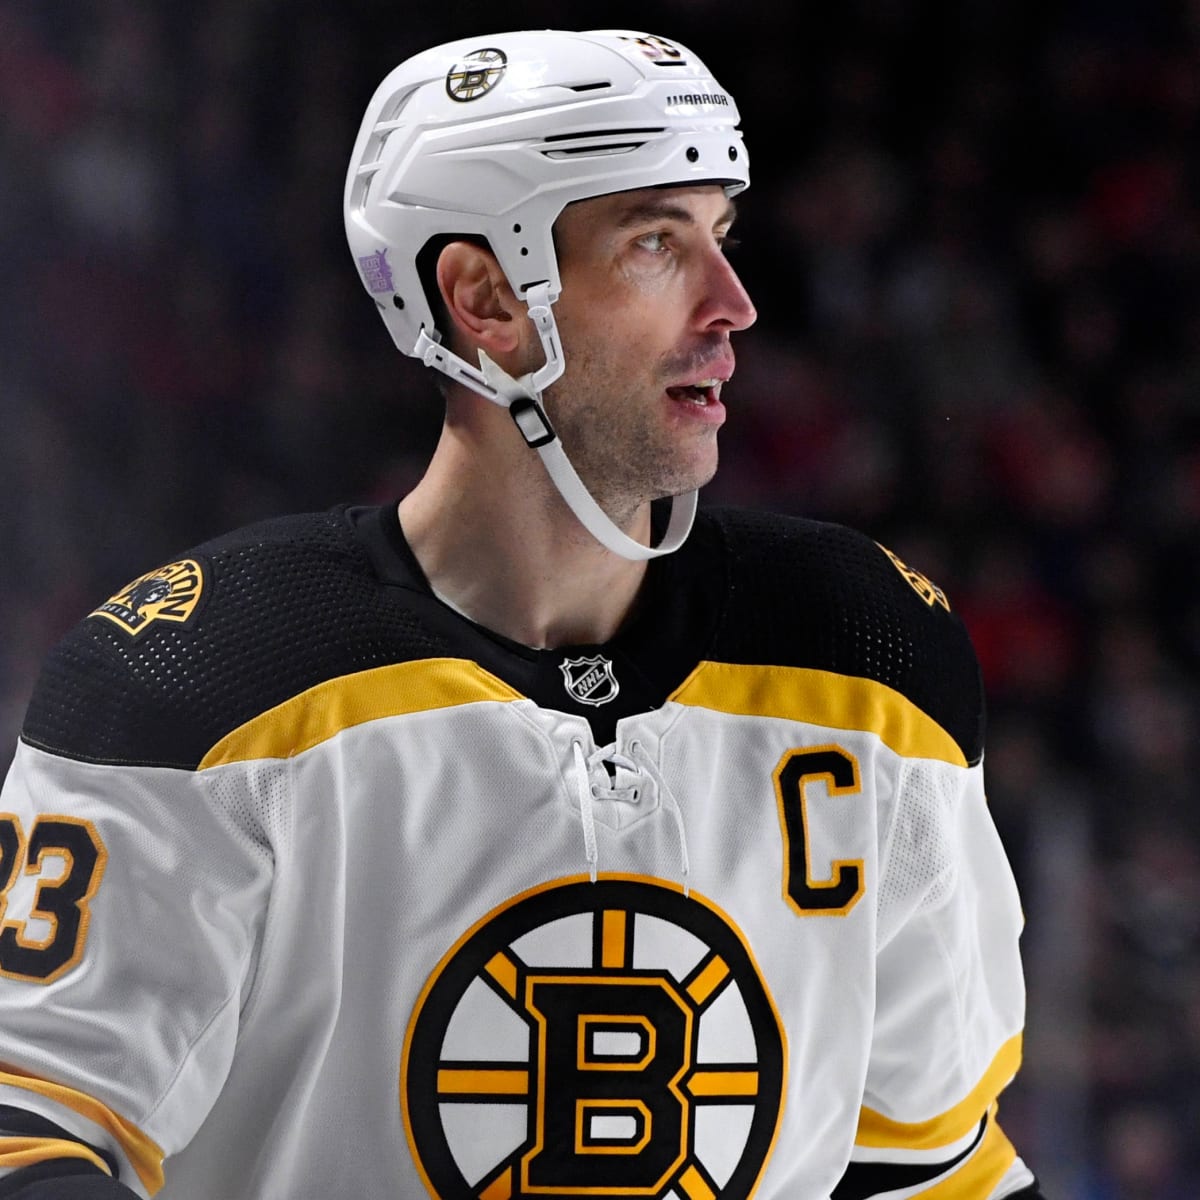 Zdeno Chara retires from the NHL at 45